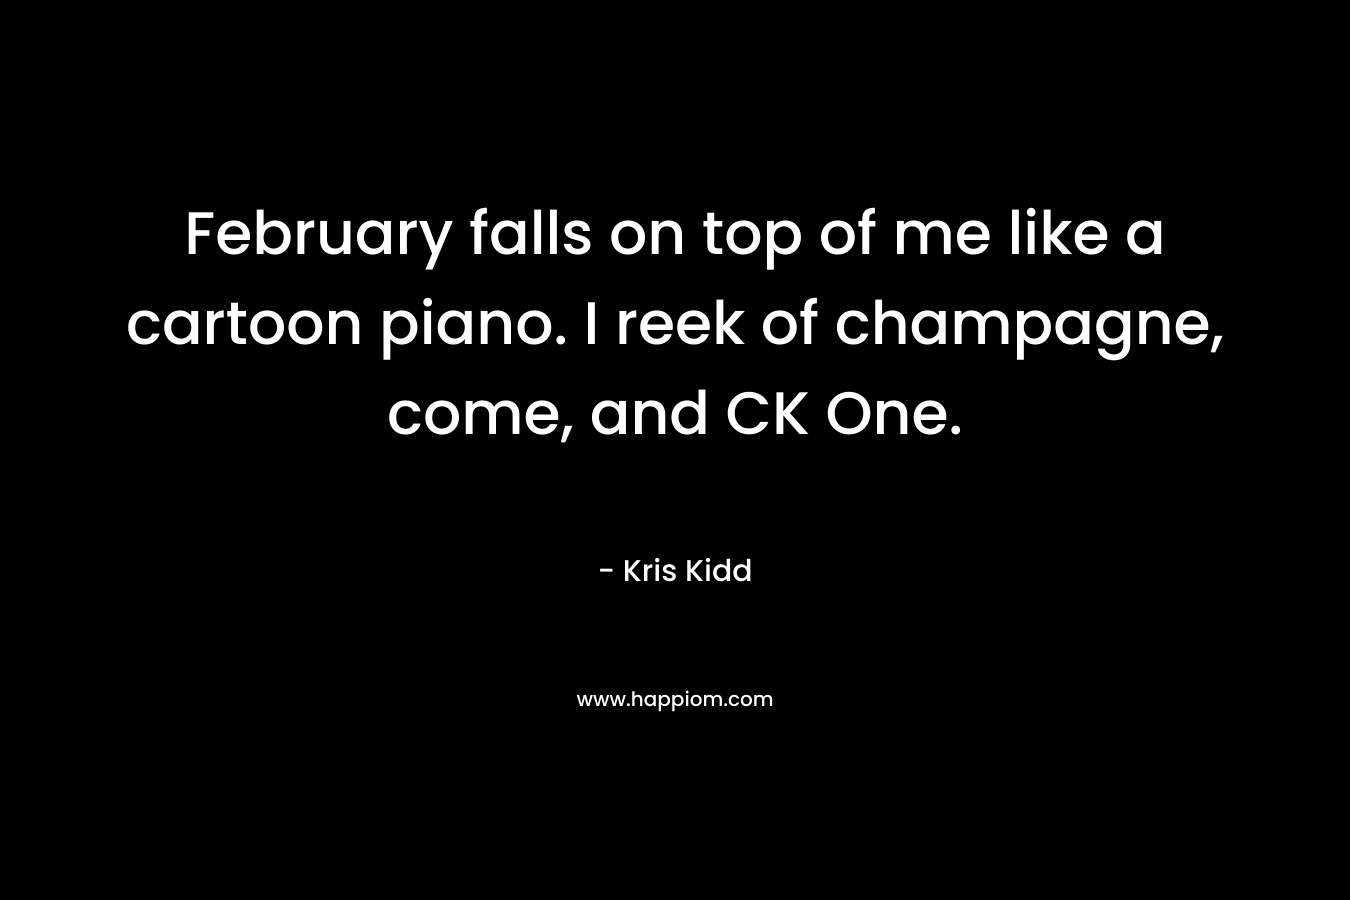 February falls on top of me like a cartoon piano. I reek of champagne, come, and CK One. – Kris Kidd